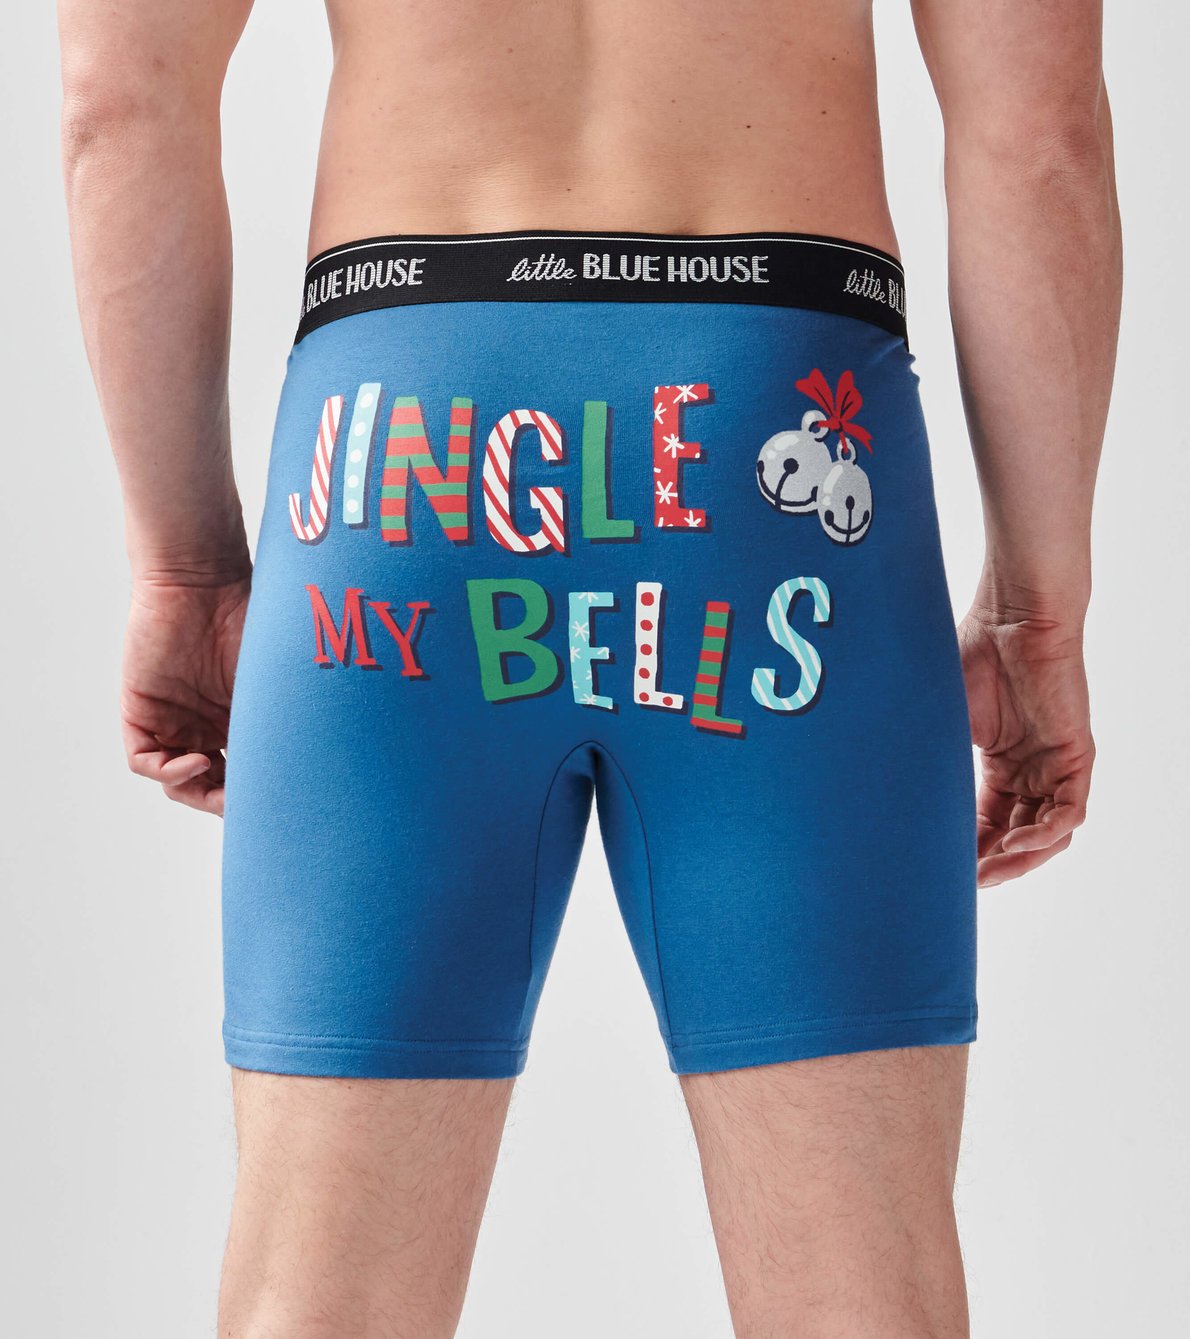 View larger image of Men's Jingle My Bells Boxers